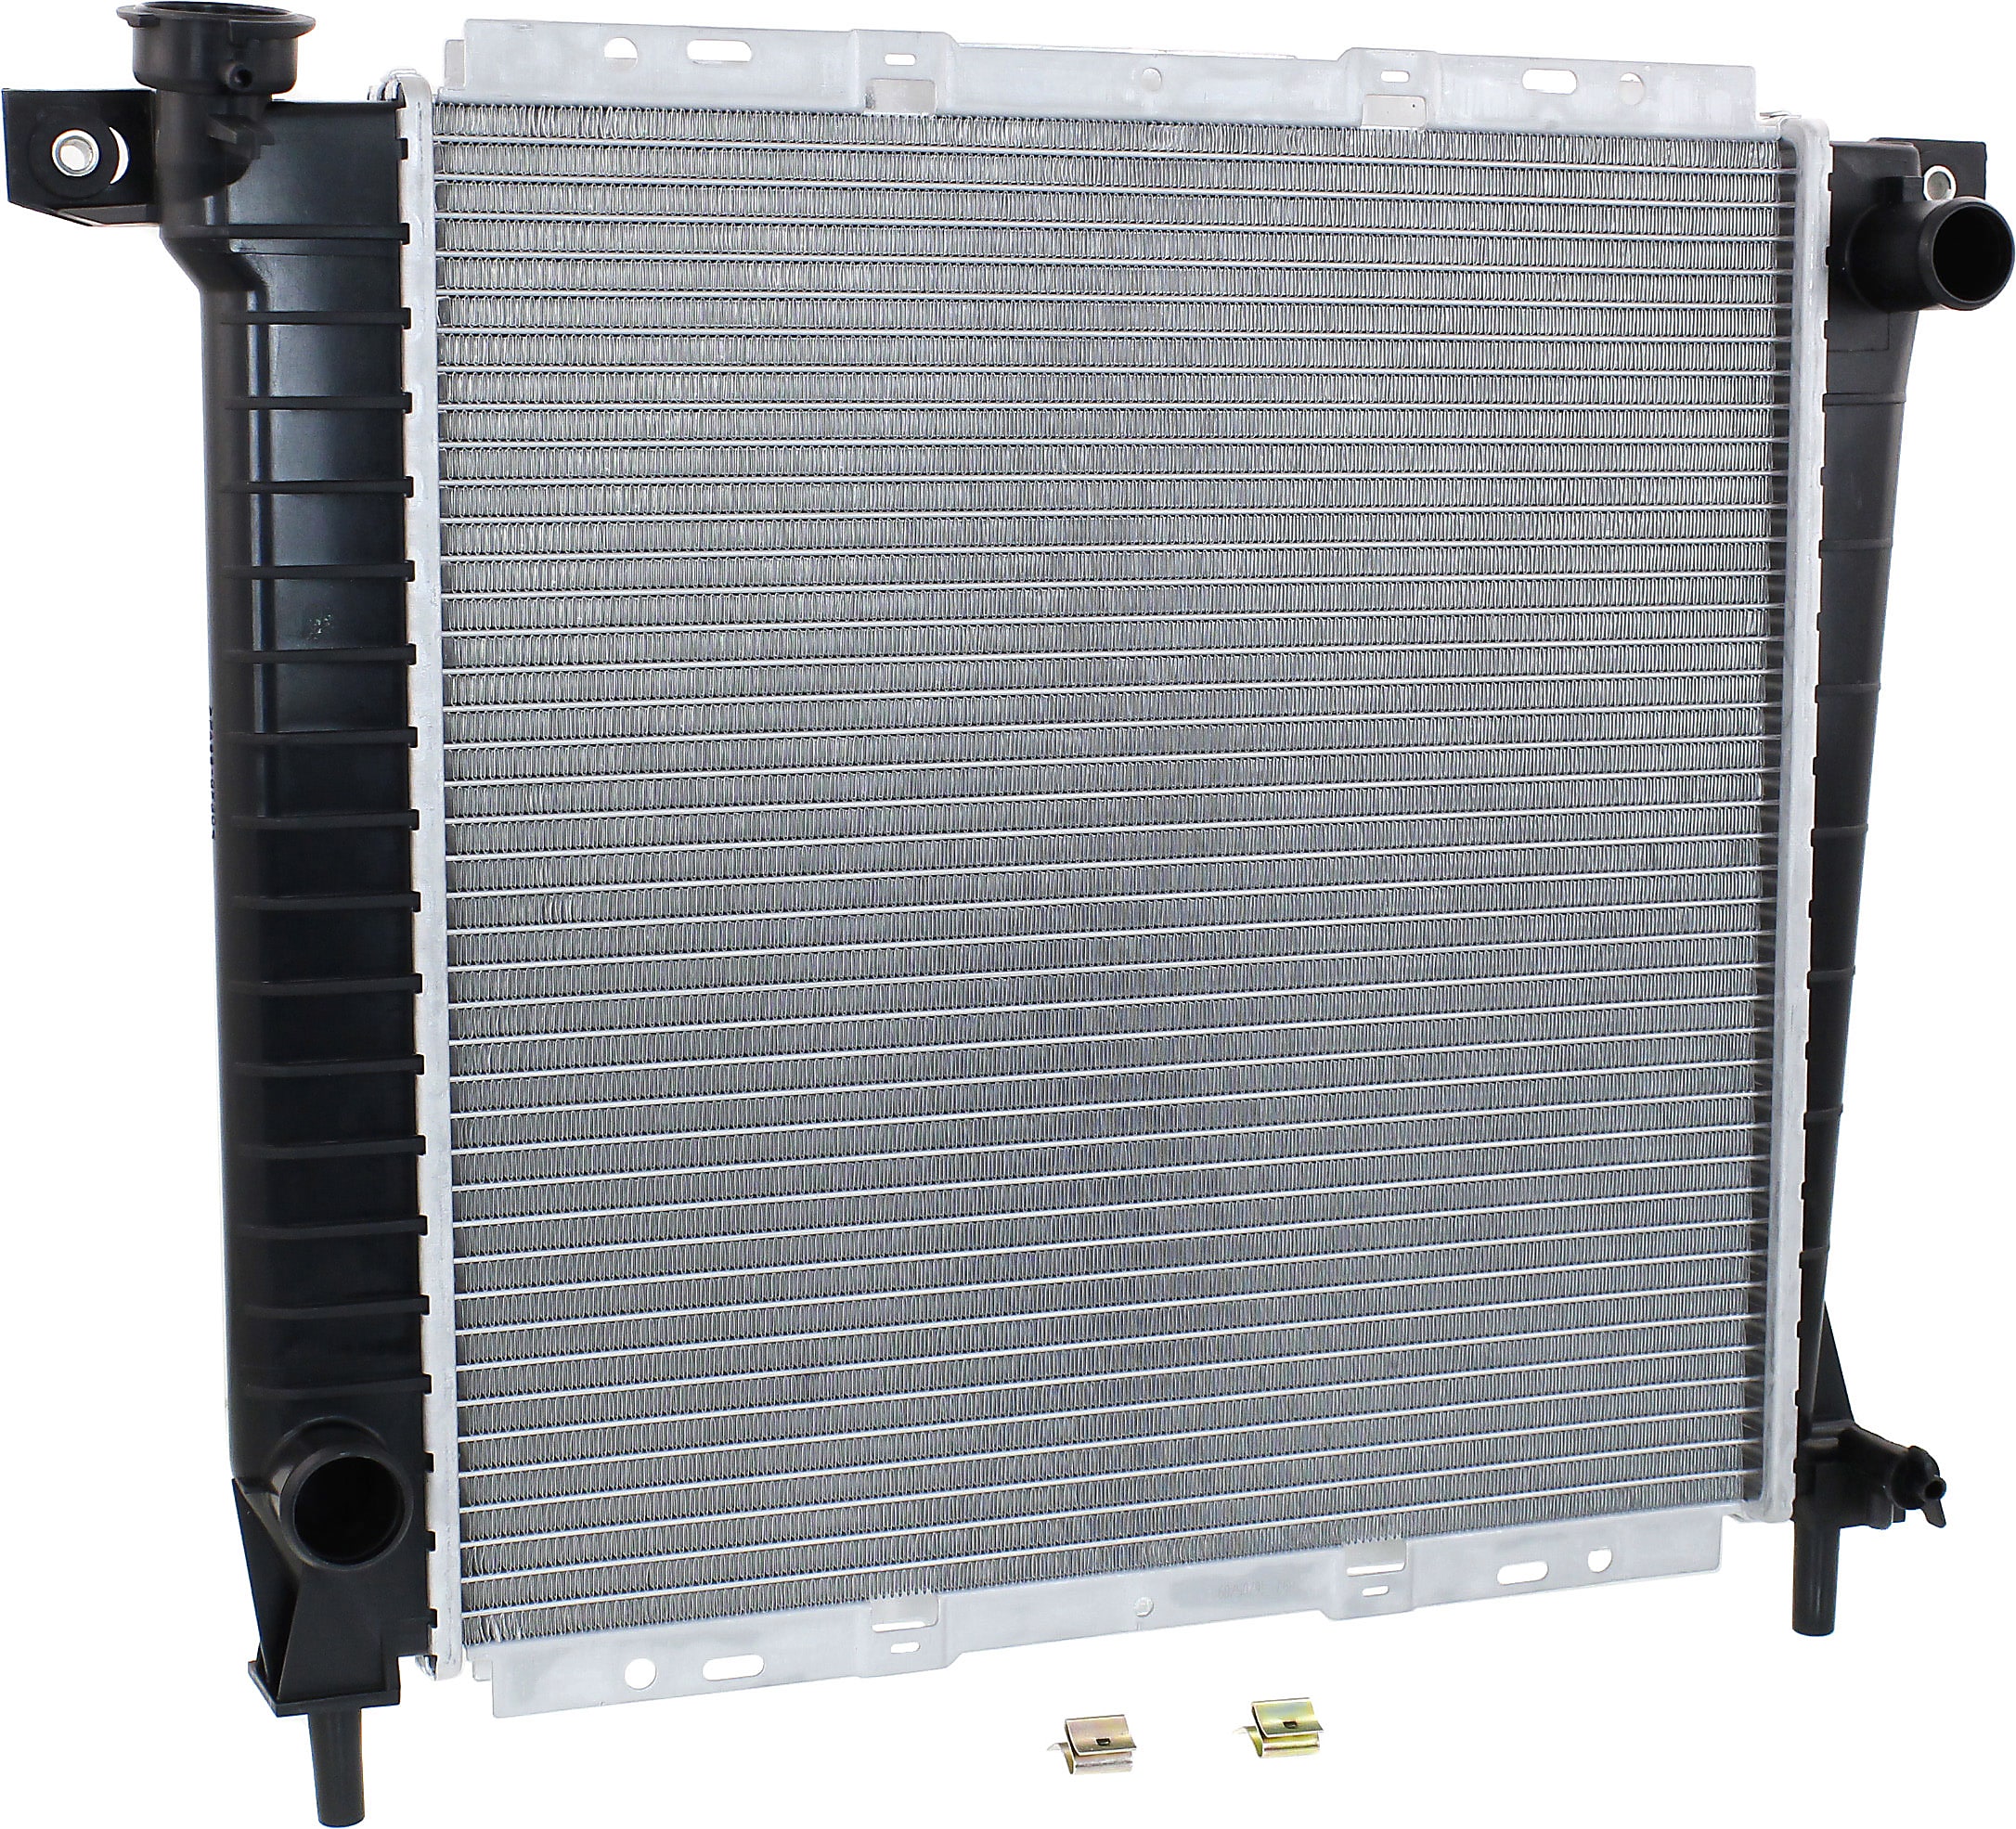 Details about   3 Row Cold Champion All Aluminum Radiator for 1994 Mazda B4000 Pickup V6 Engine